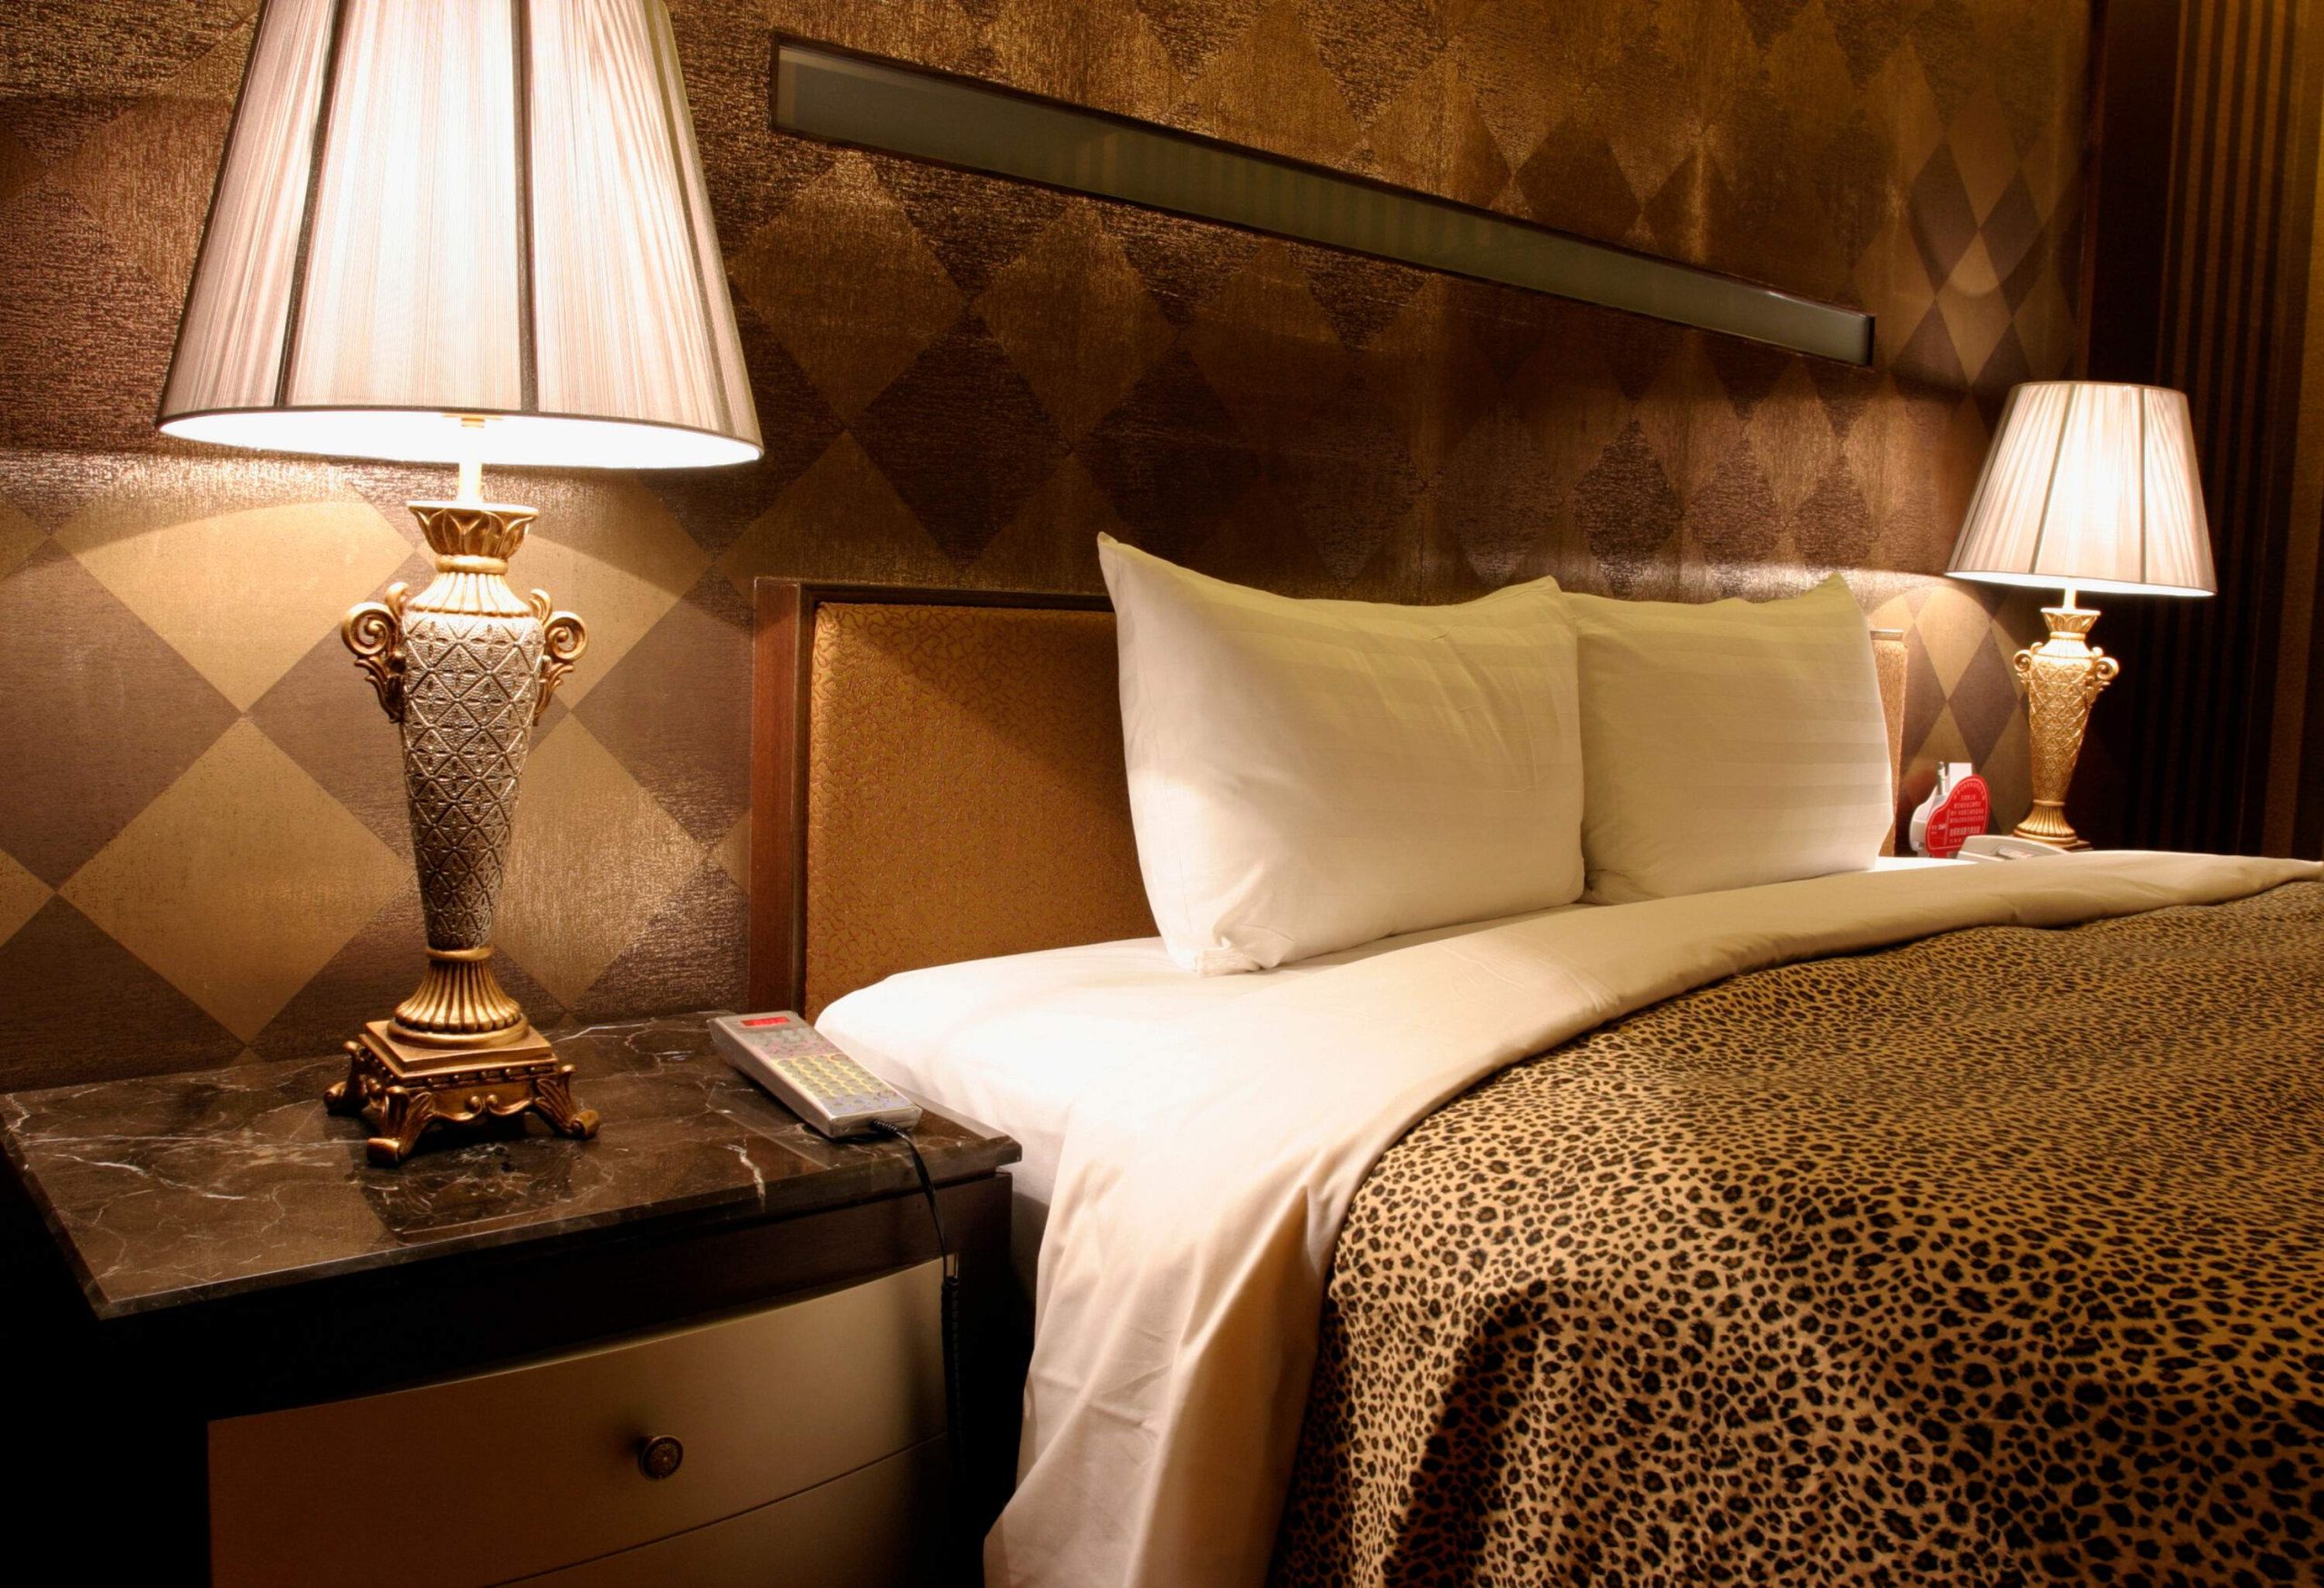 A cosy hotel bedroom adorned with a leopard print bedsheet, accentuated by warmly illuminated bedside lamps.